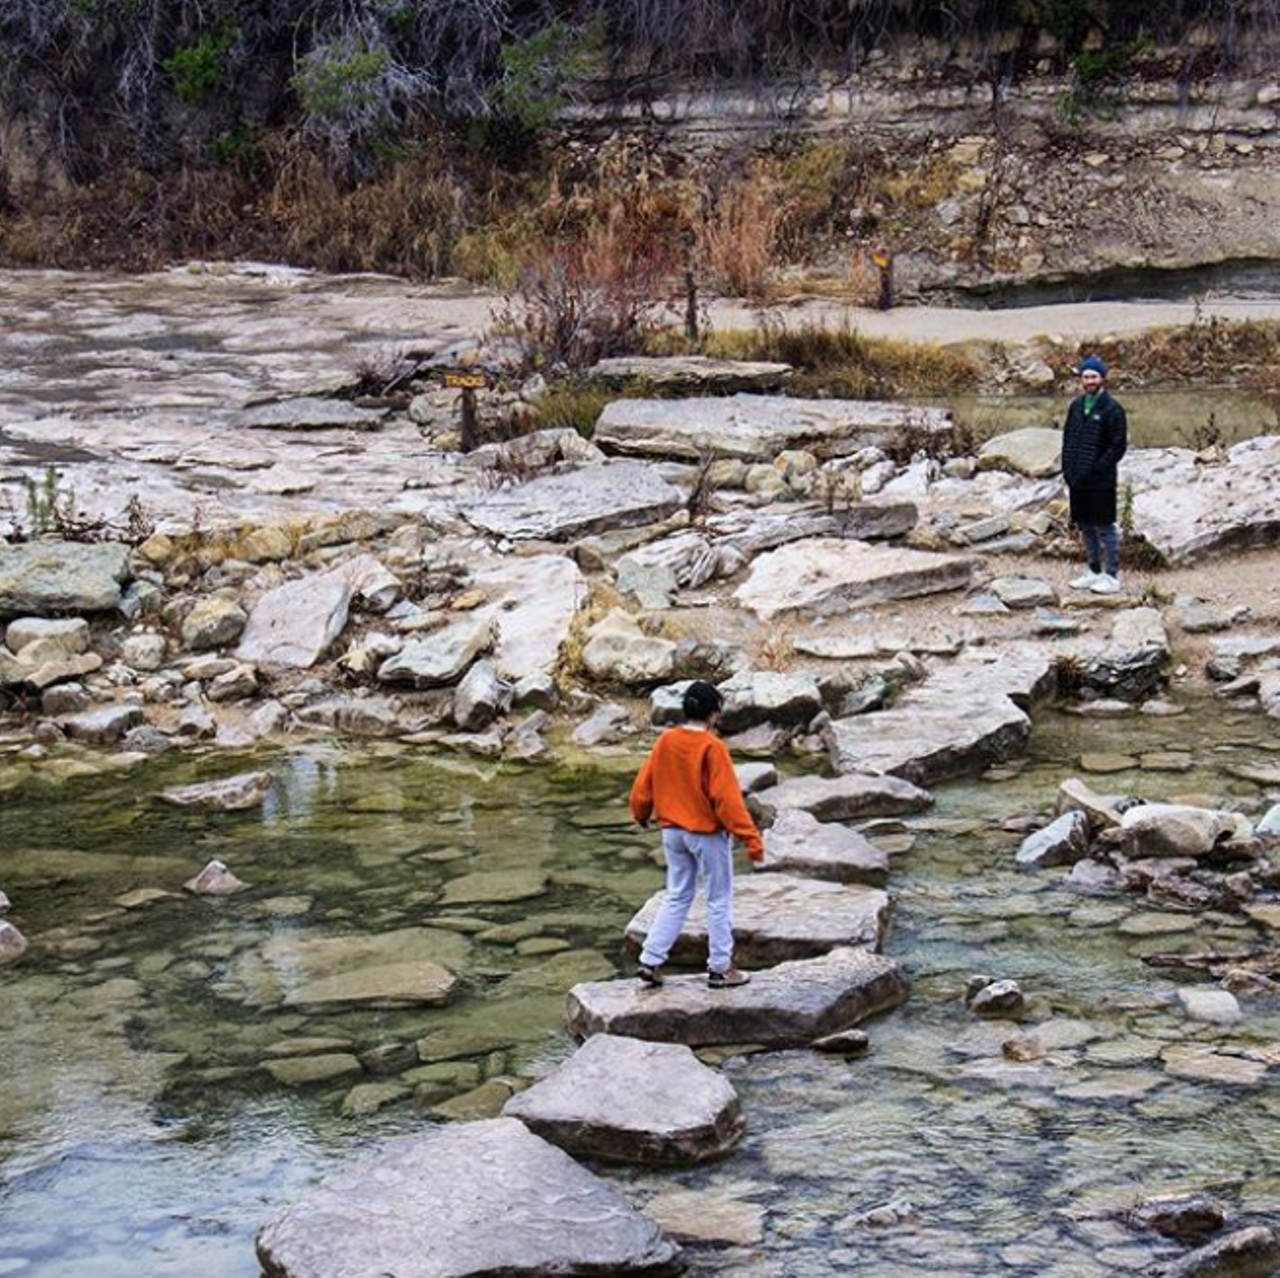 Dinosaur Valley State Park
1629 Park Rd 59, Glen Rose, (254) 897-4588, tpwd.texas.gov
You’ll be able to do all the normal stuff a Texas state park offers, but also – wait for it – check out some very-real dinosaur tracks. While the tracks aren’t always visible (depedent on wet conditons, weather), the bed of the Paluxy River hold tracks left in the mud by dinosaurs (it was probably at the end of the ocean at the time).
Photo via Instagram / ellenlouisecox